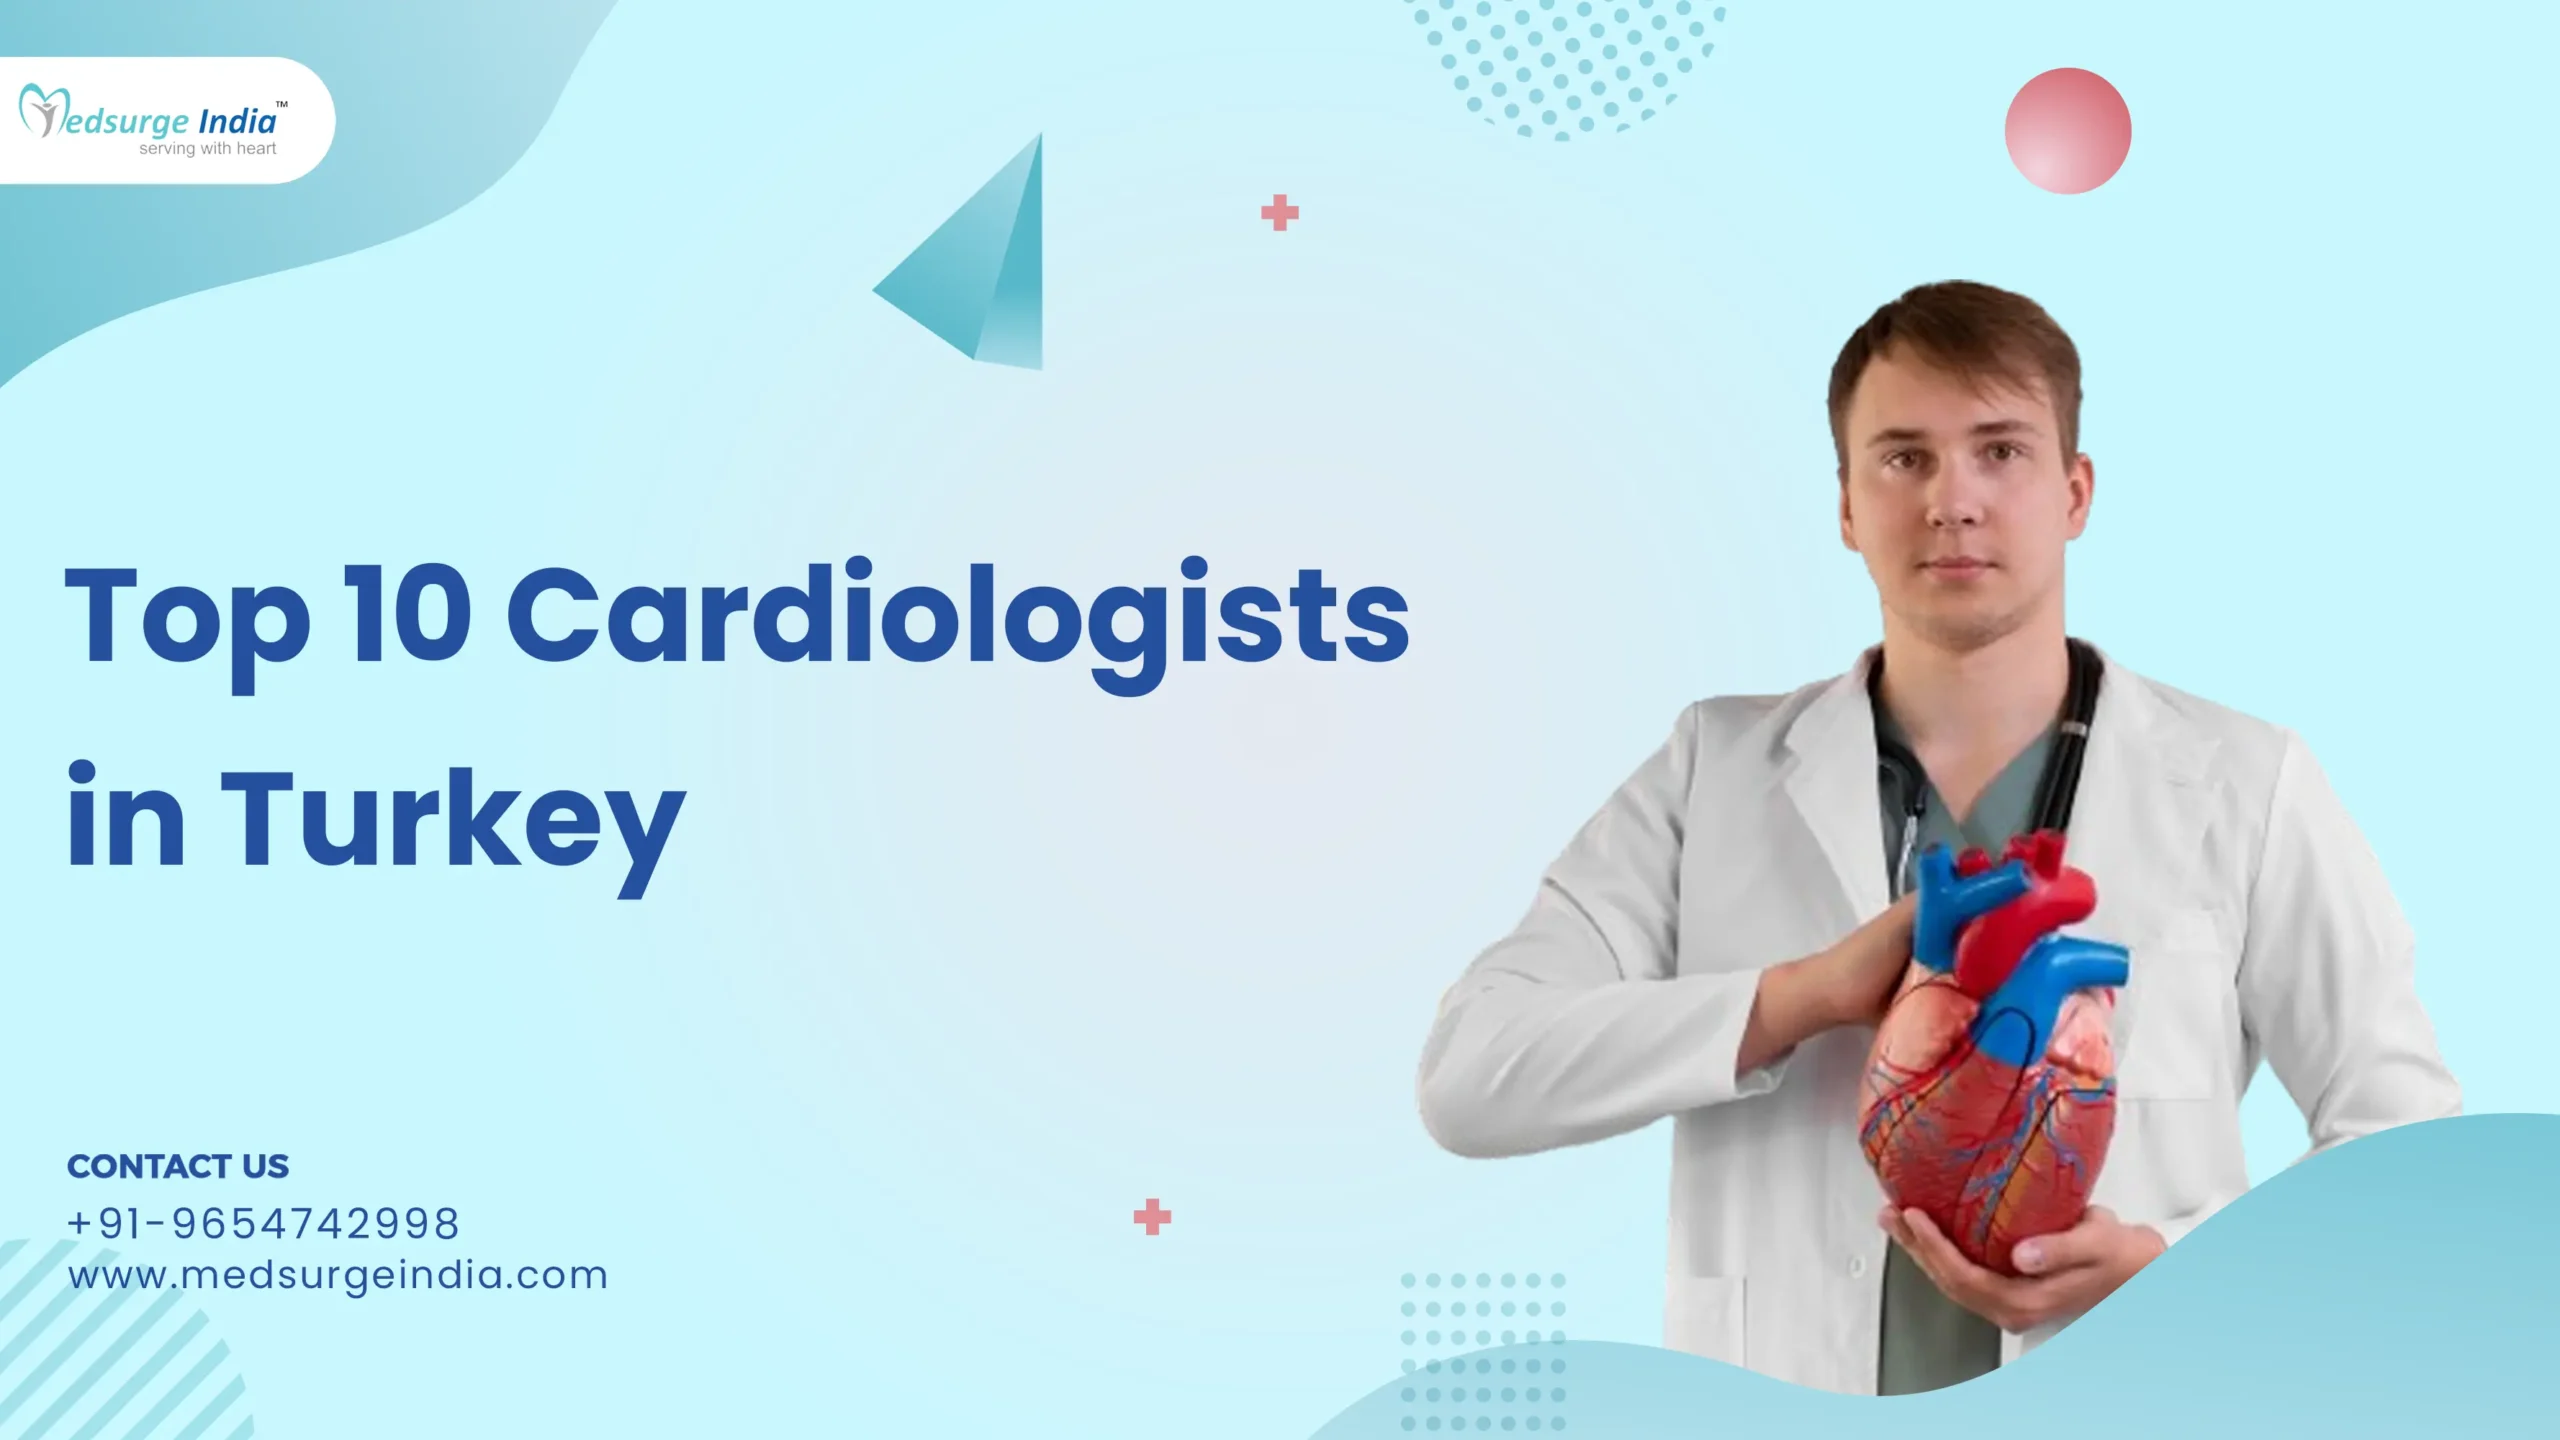 Top 10 Cardiologists in Turkey